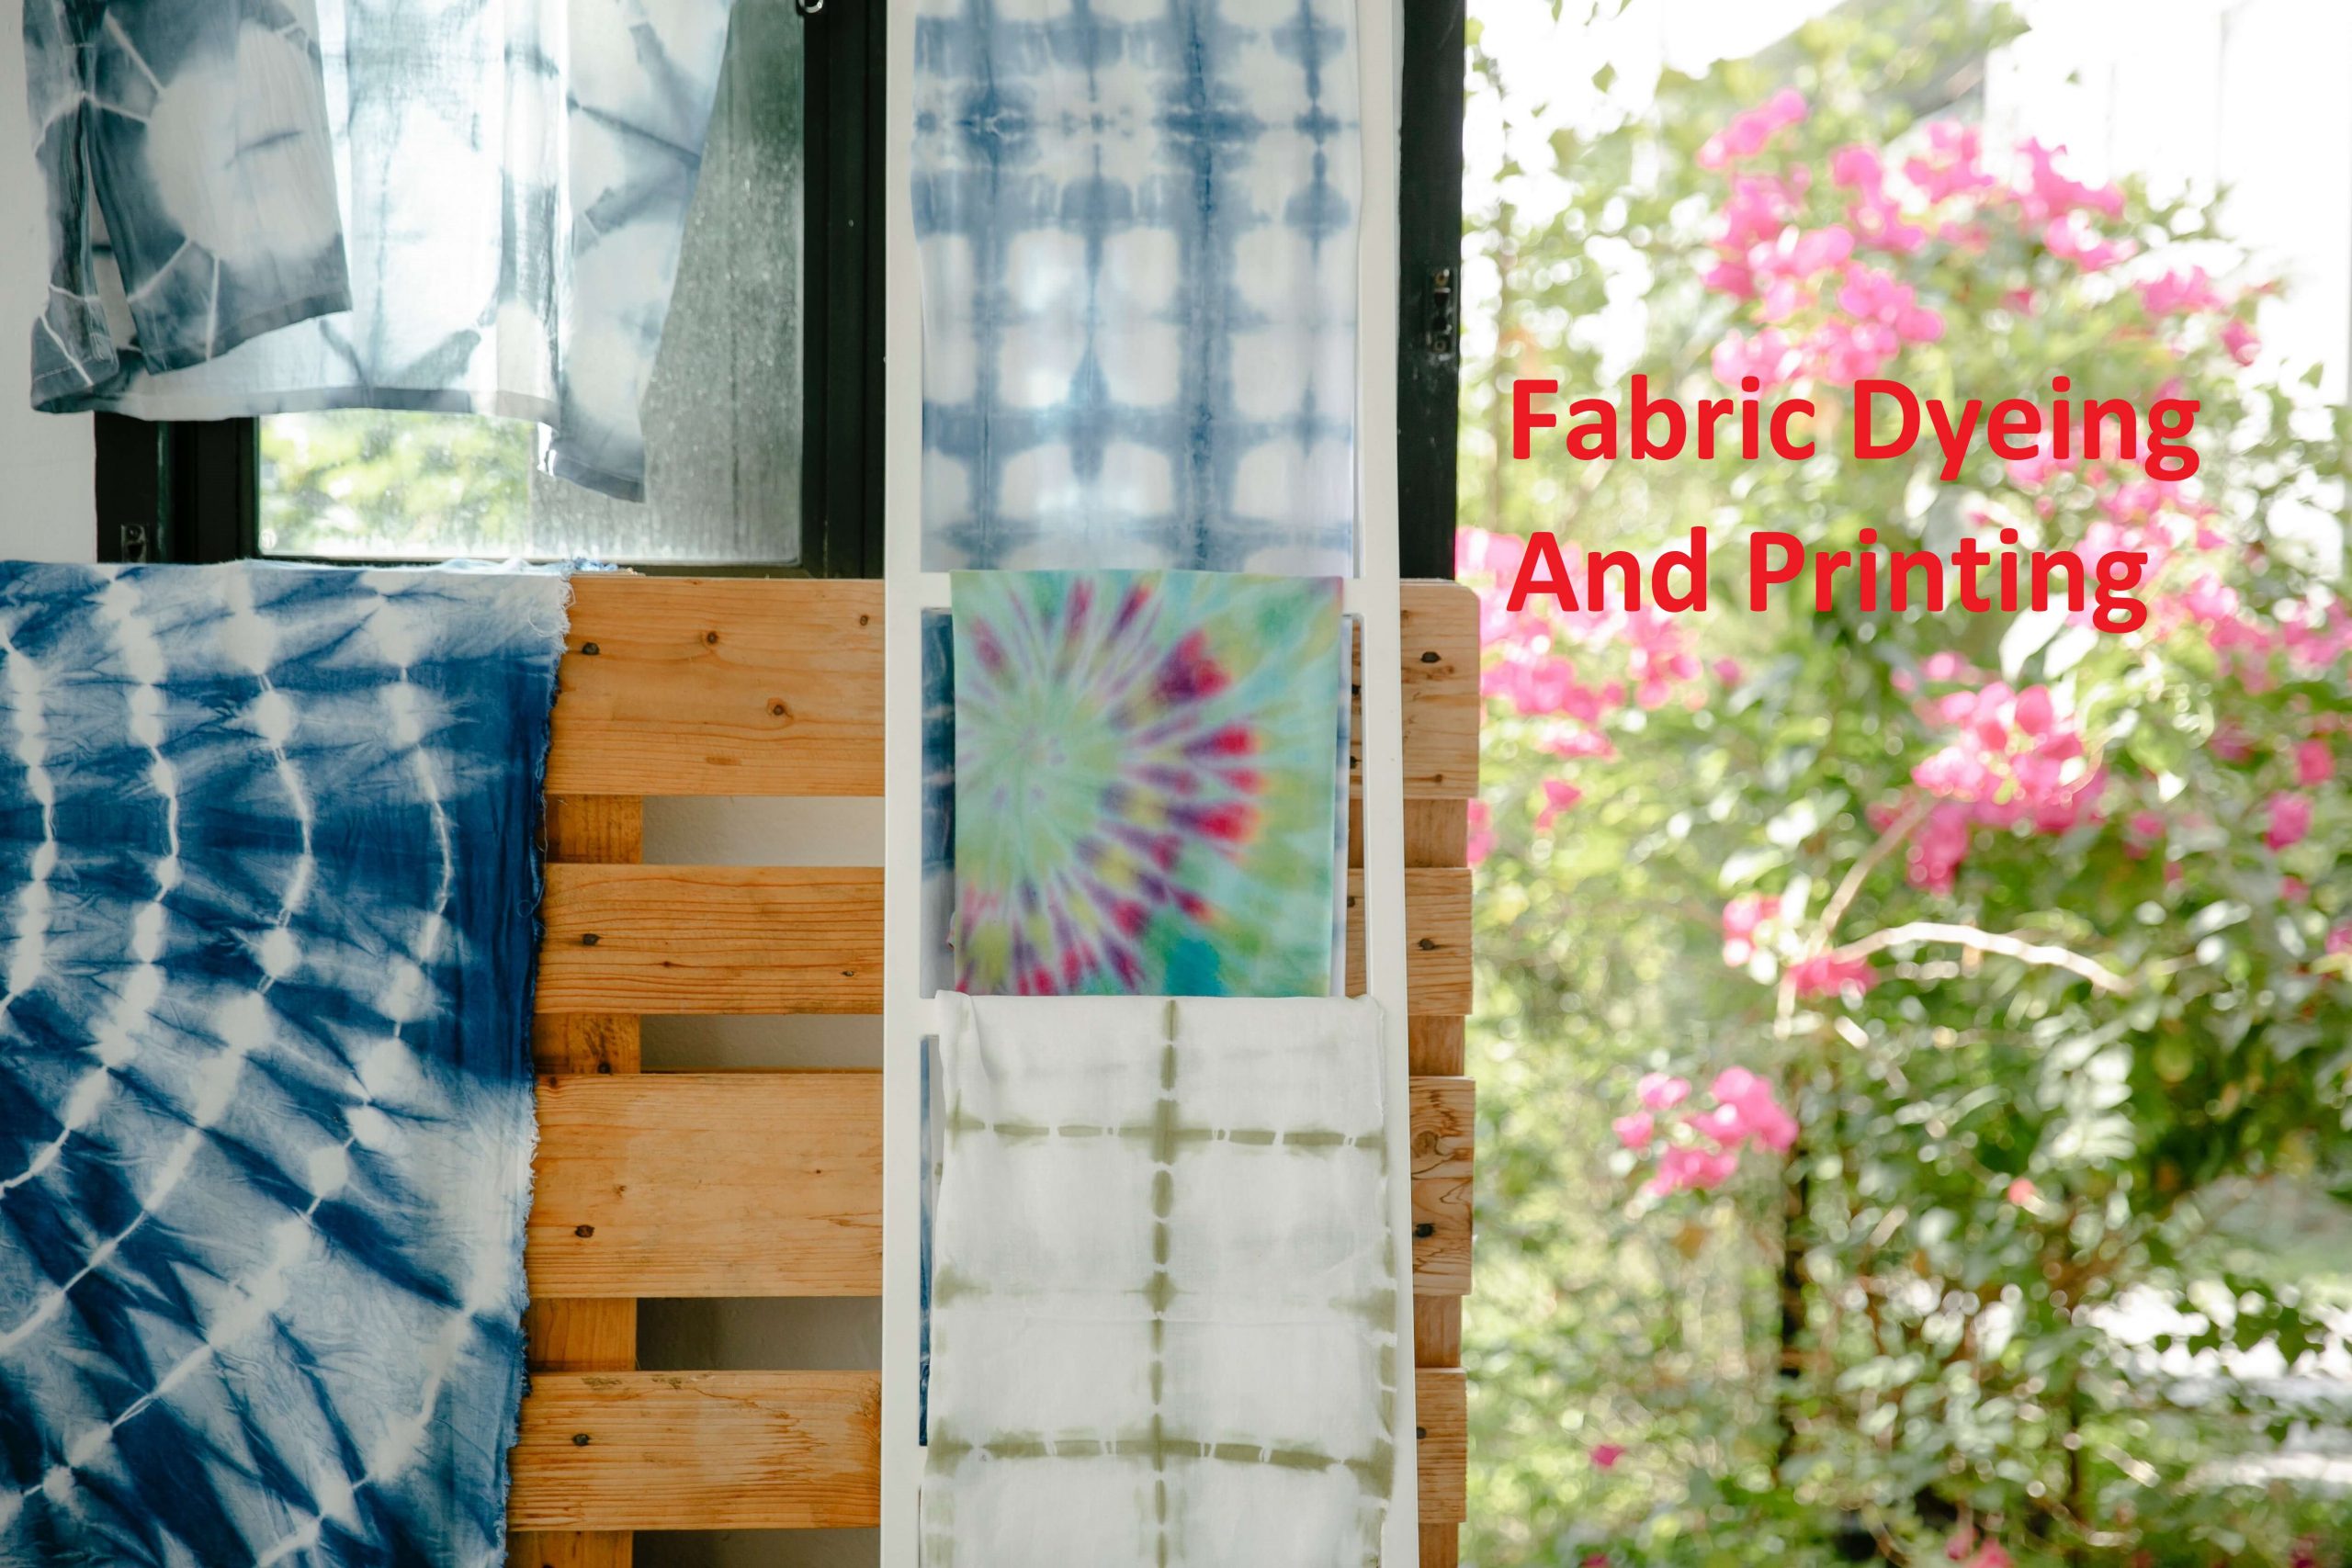 What do You need To Know About Fabric Dyeing And Printing?